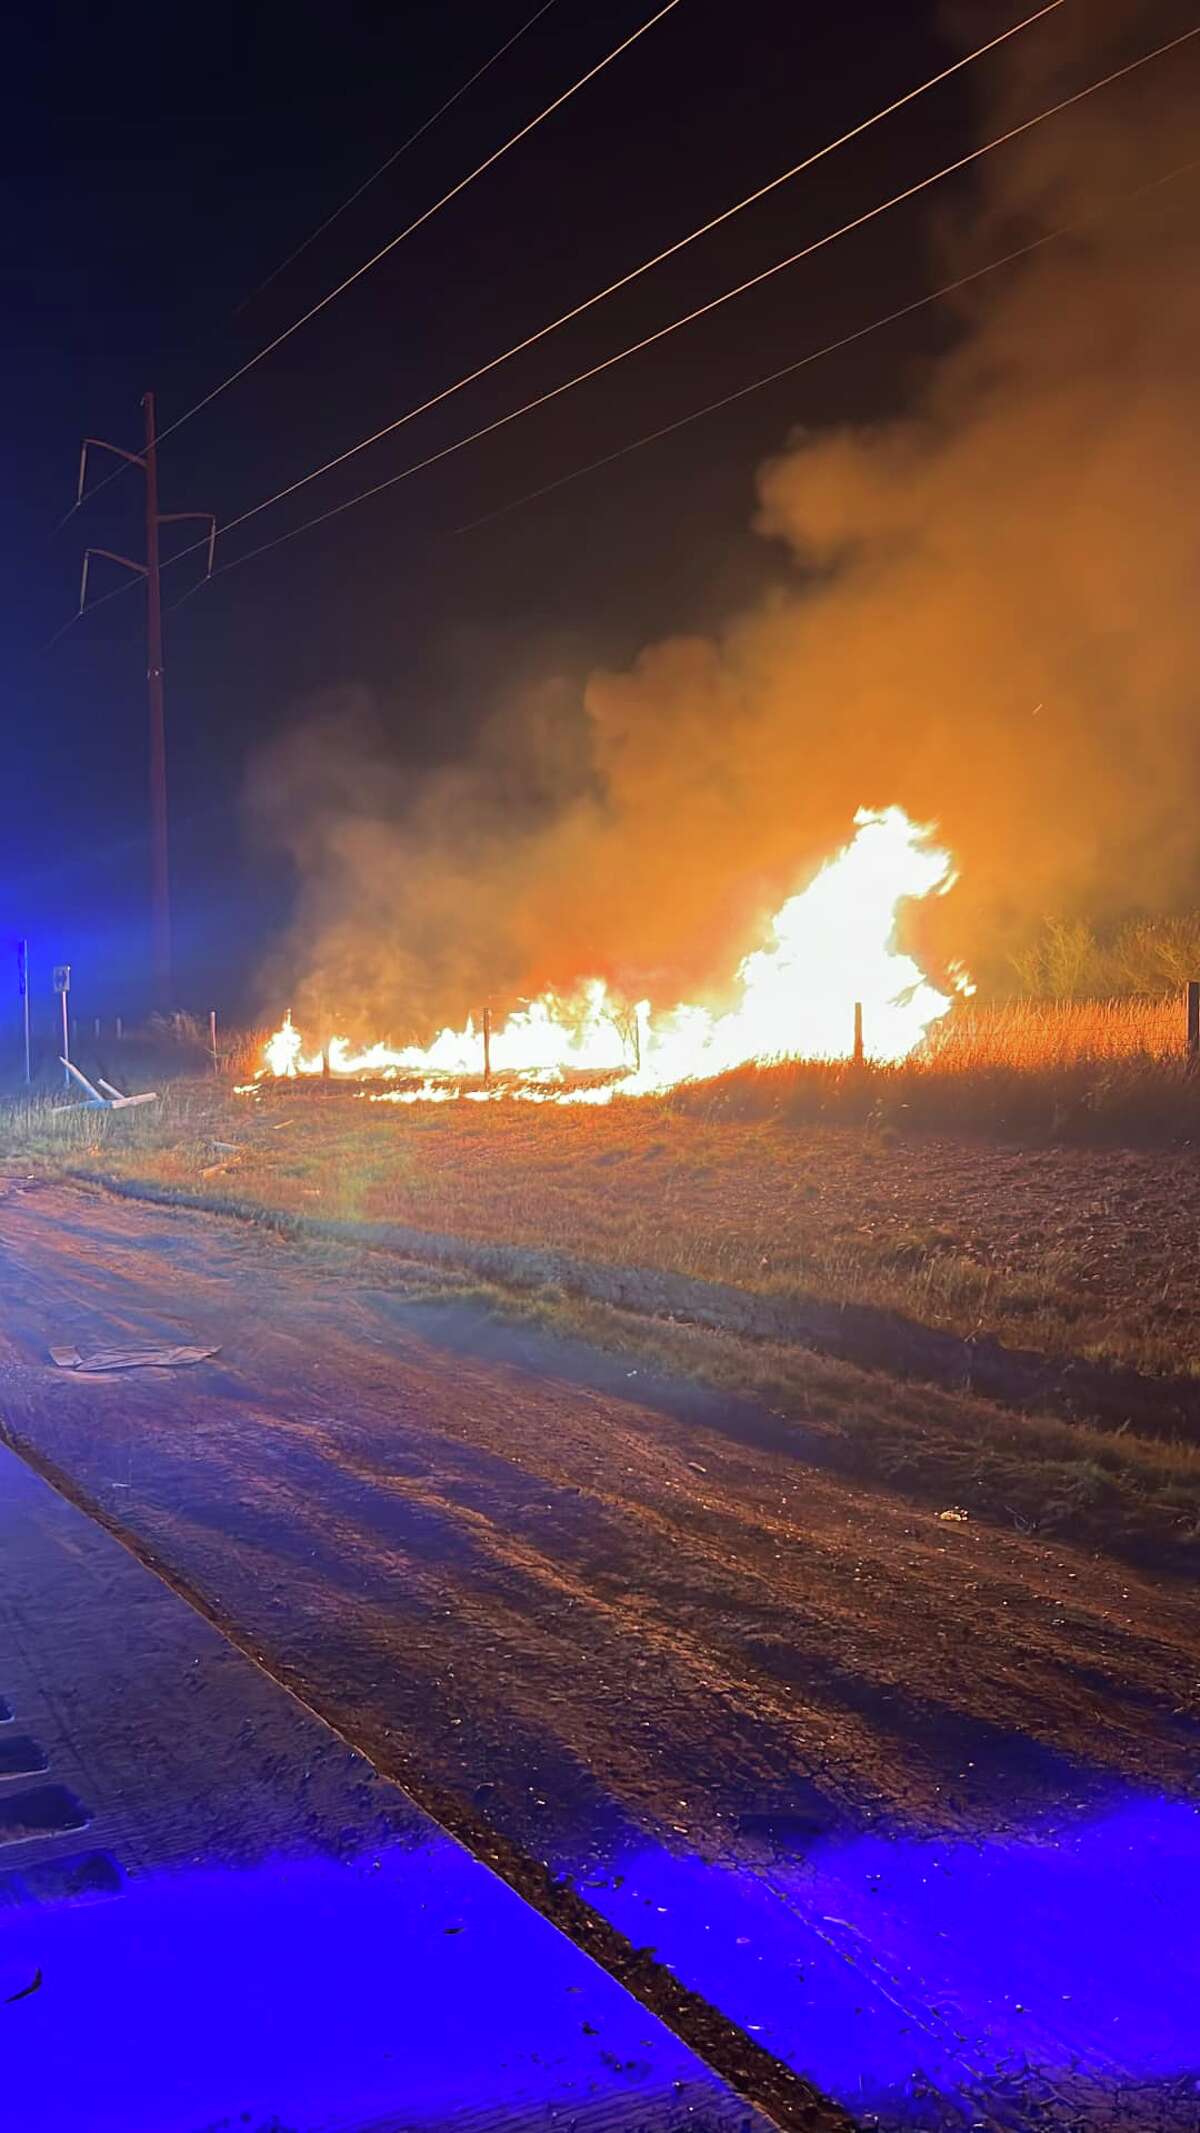 A stolen car caught on fire after a vehicle pursuit by the Encinal Police Department around mile marker 63 of Interstate Highway 35 on Sunday, March 12, 2023.